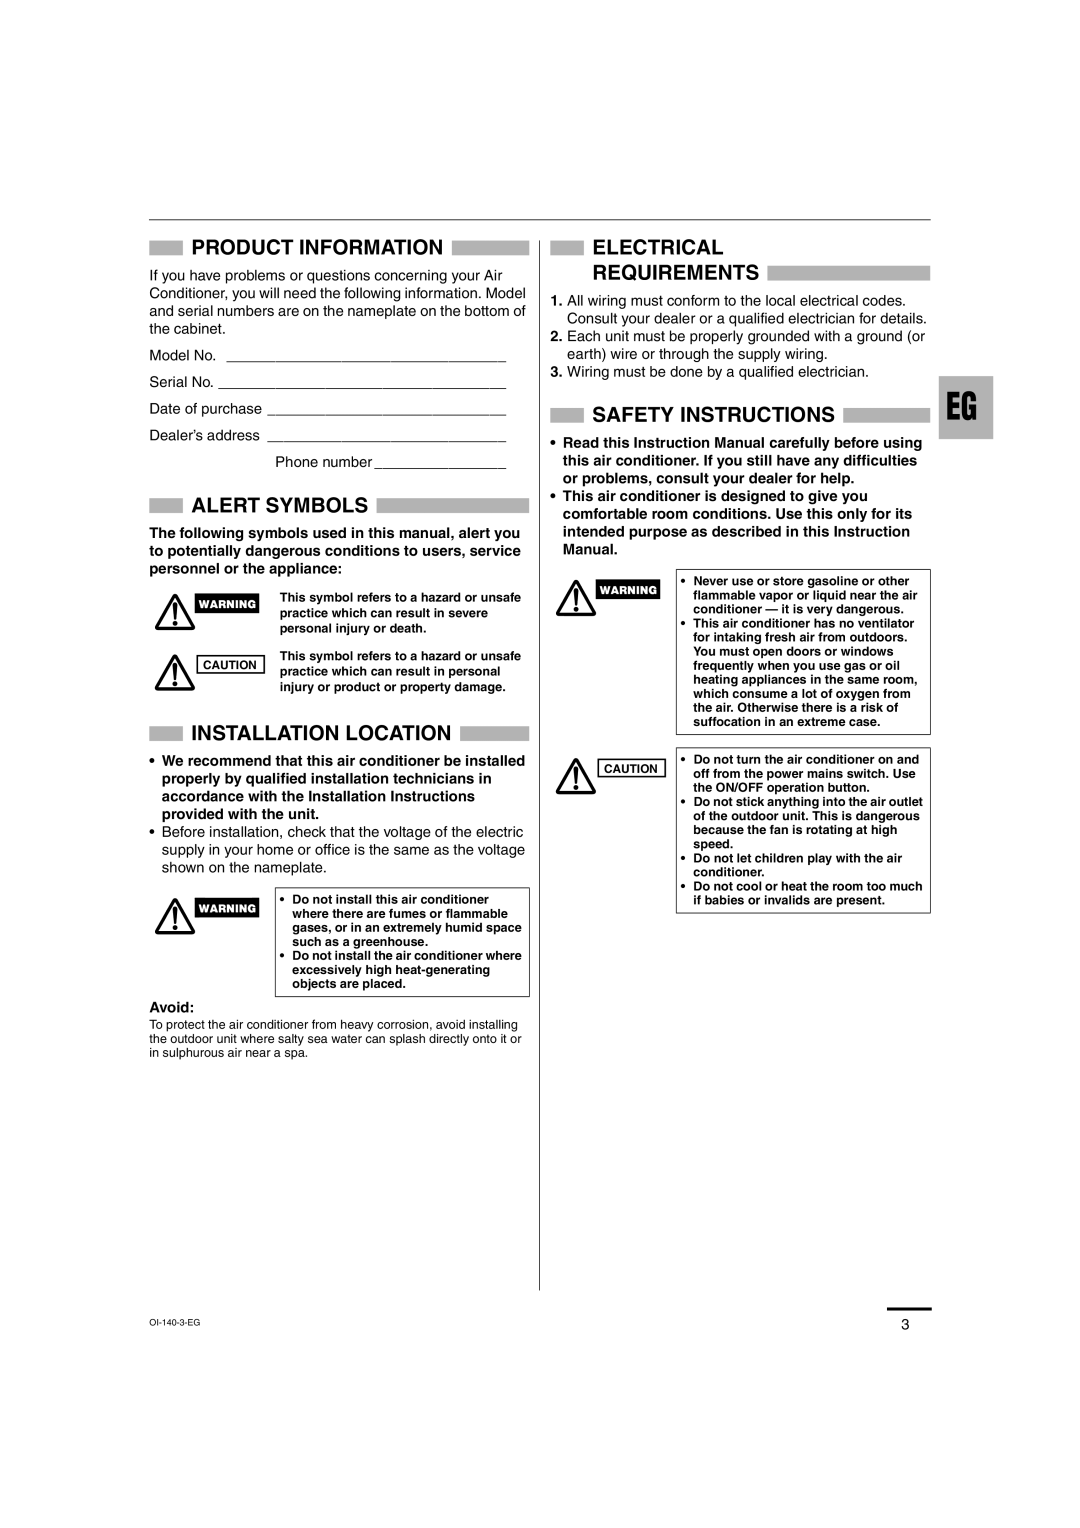 Sanyo XMHS0972 Product Information, Alert Symbols, Installation Location, Electrical Requirements, Safety Instructions 